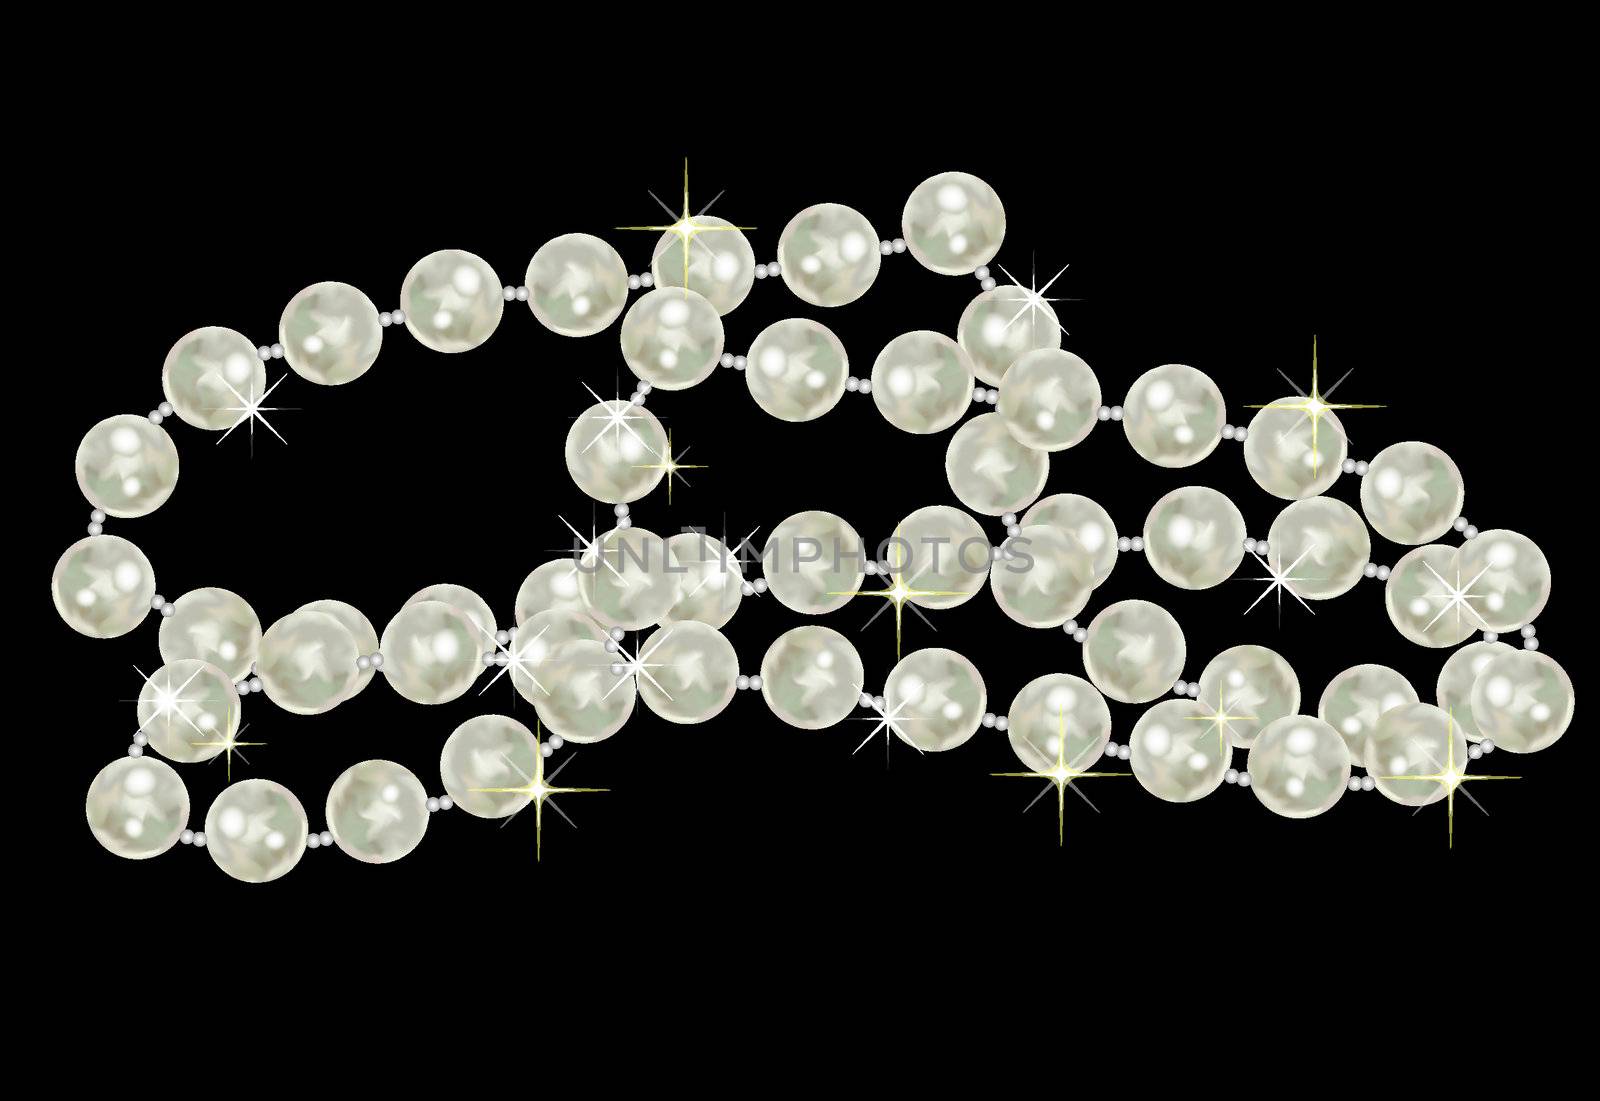 illustration of a pearl necklace